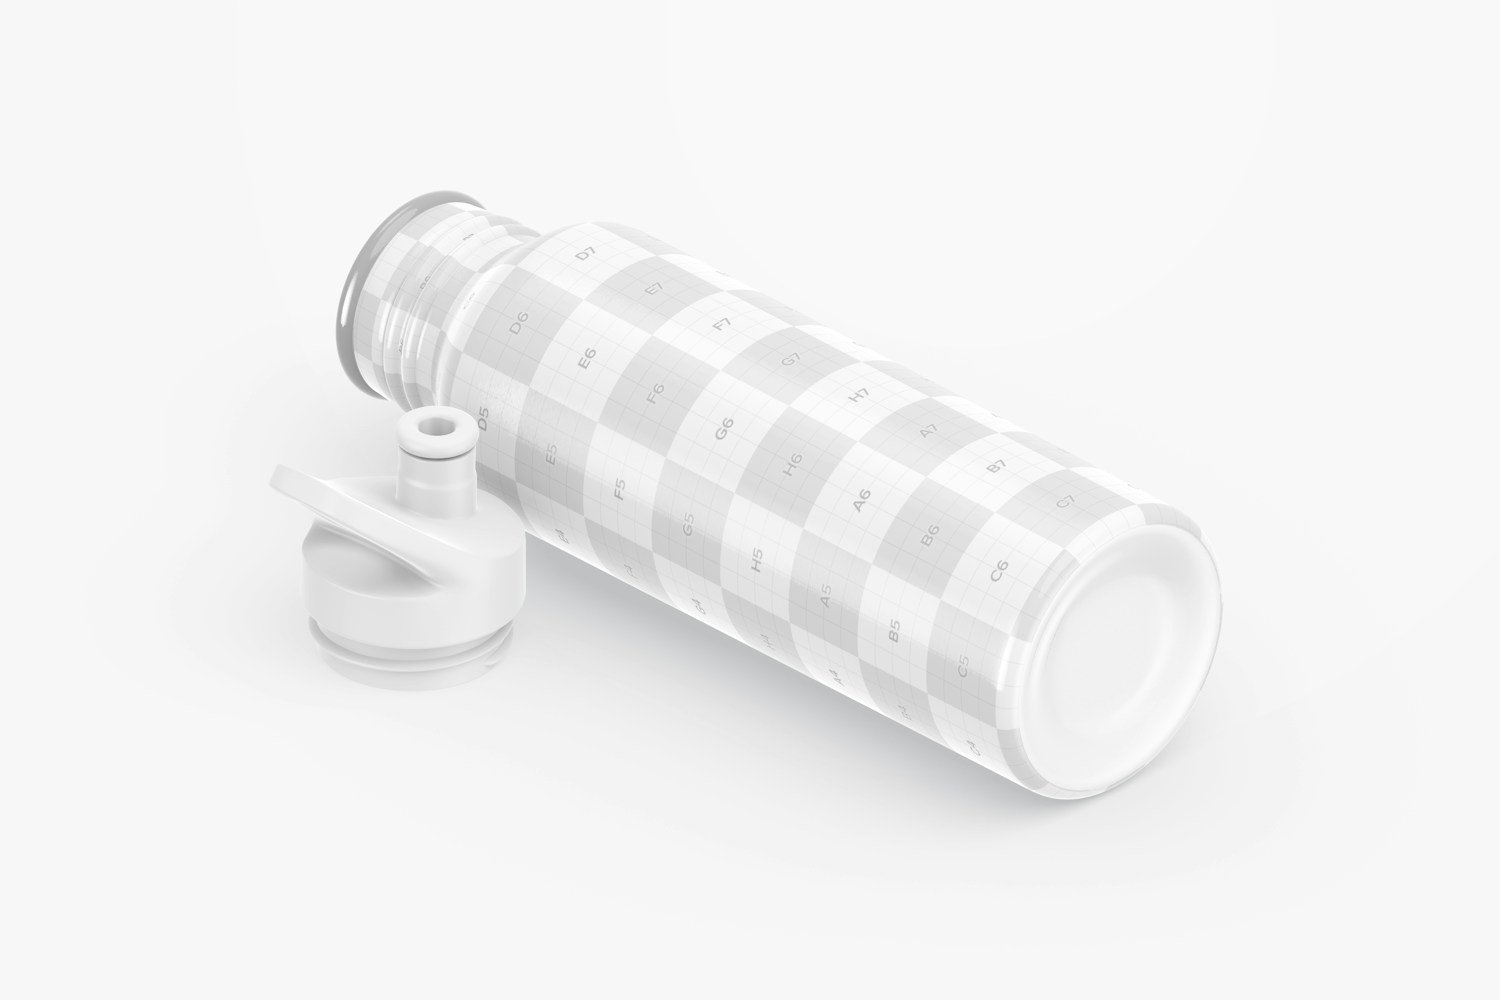 Bottle with Sport Cap Mockup, Isometric Left View